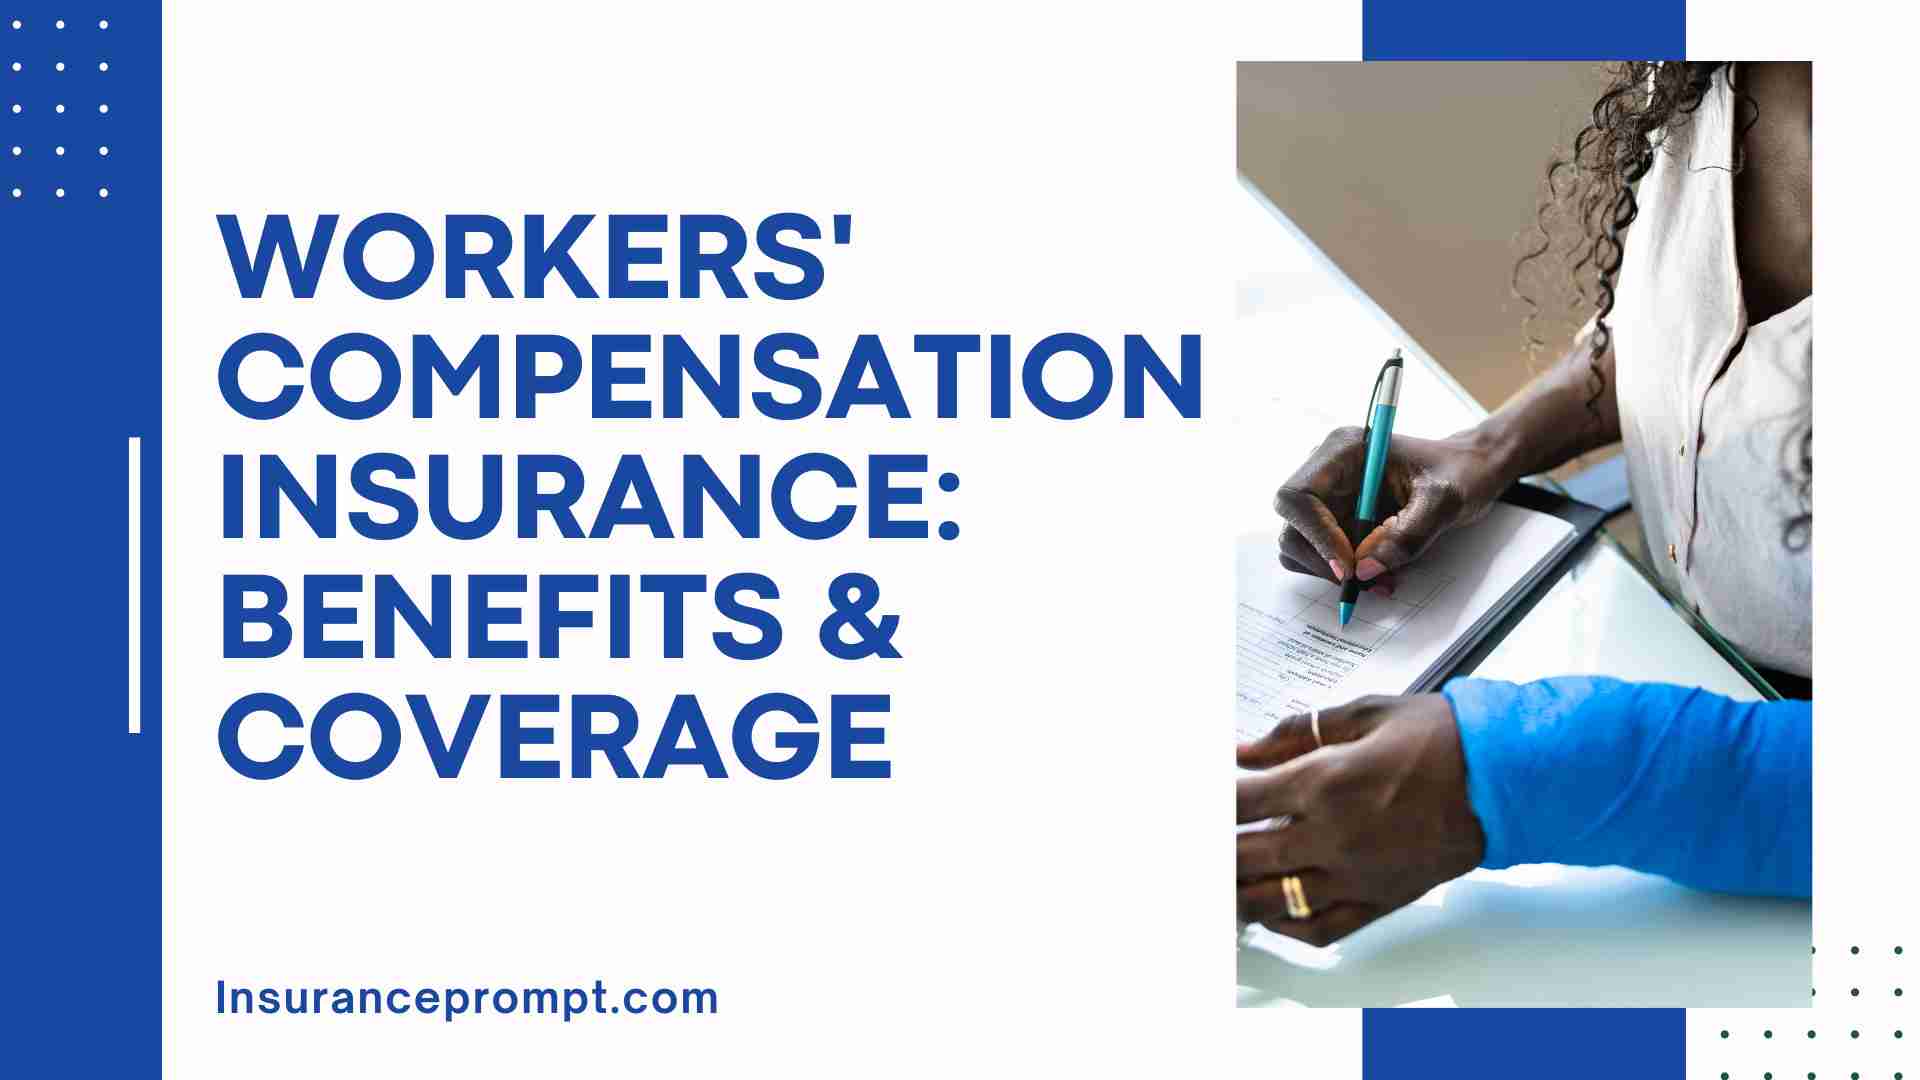 Workers’ Compensation Insurance in 2023: Benefits & Coverage